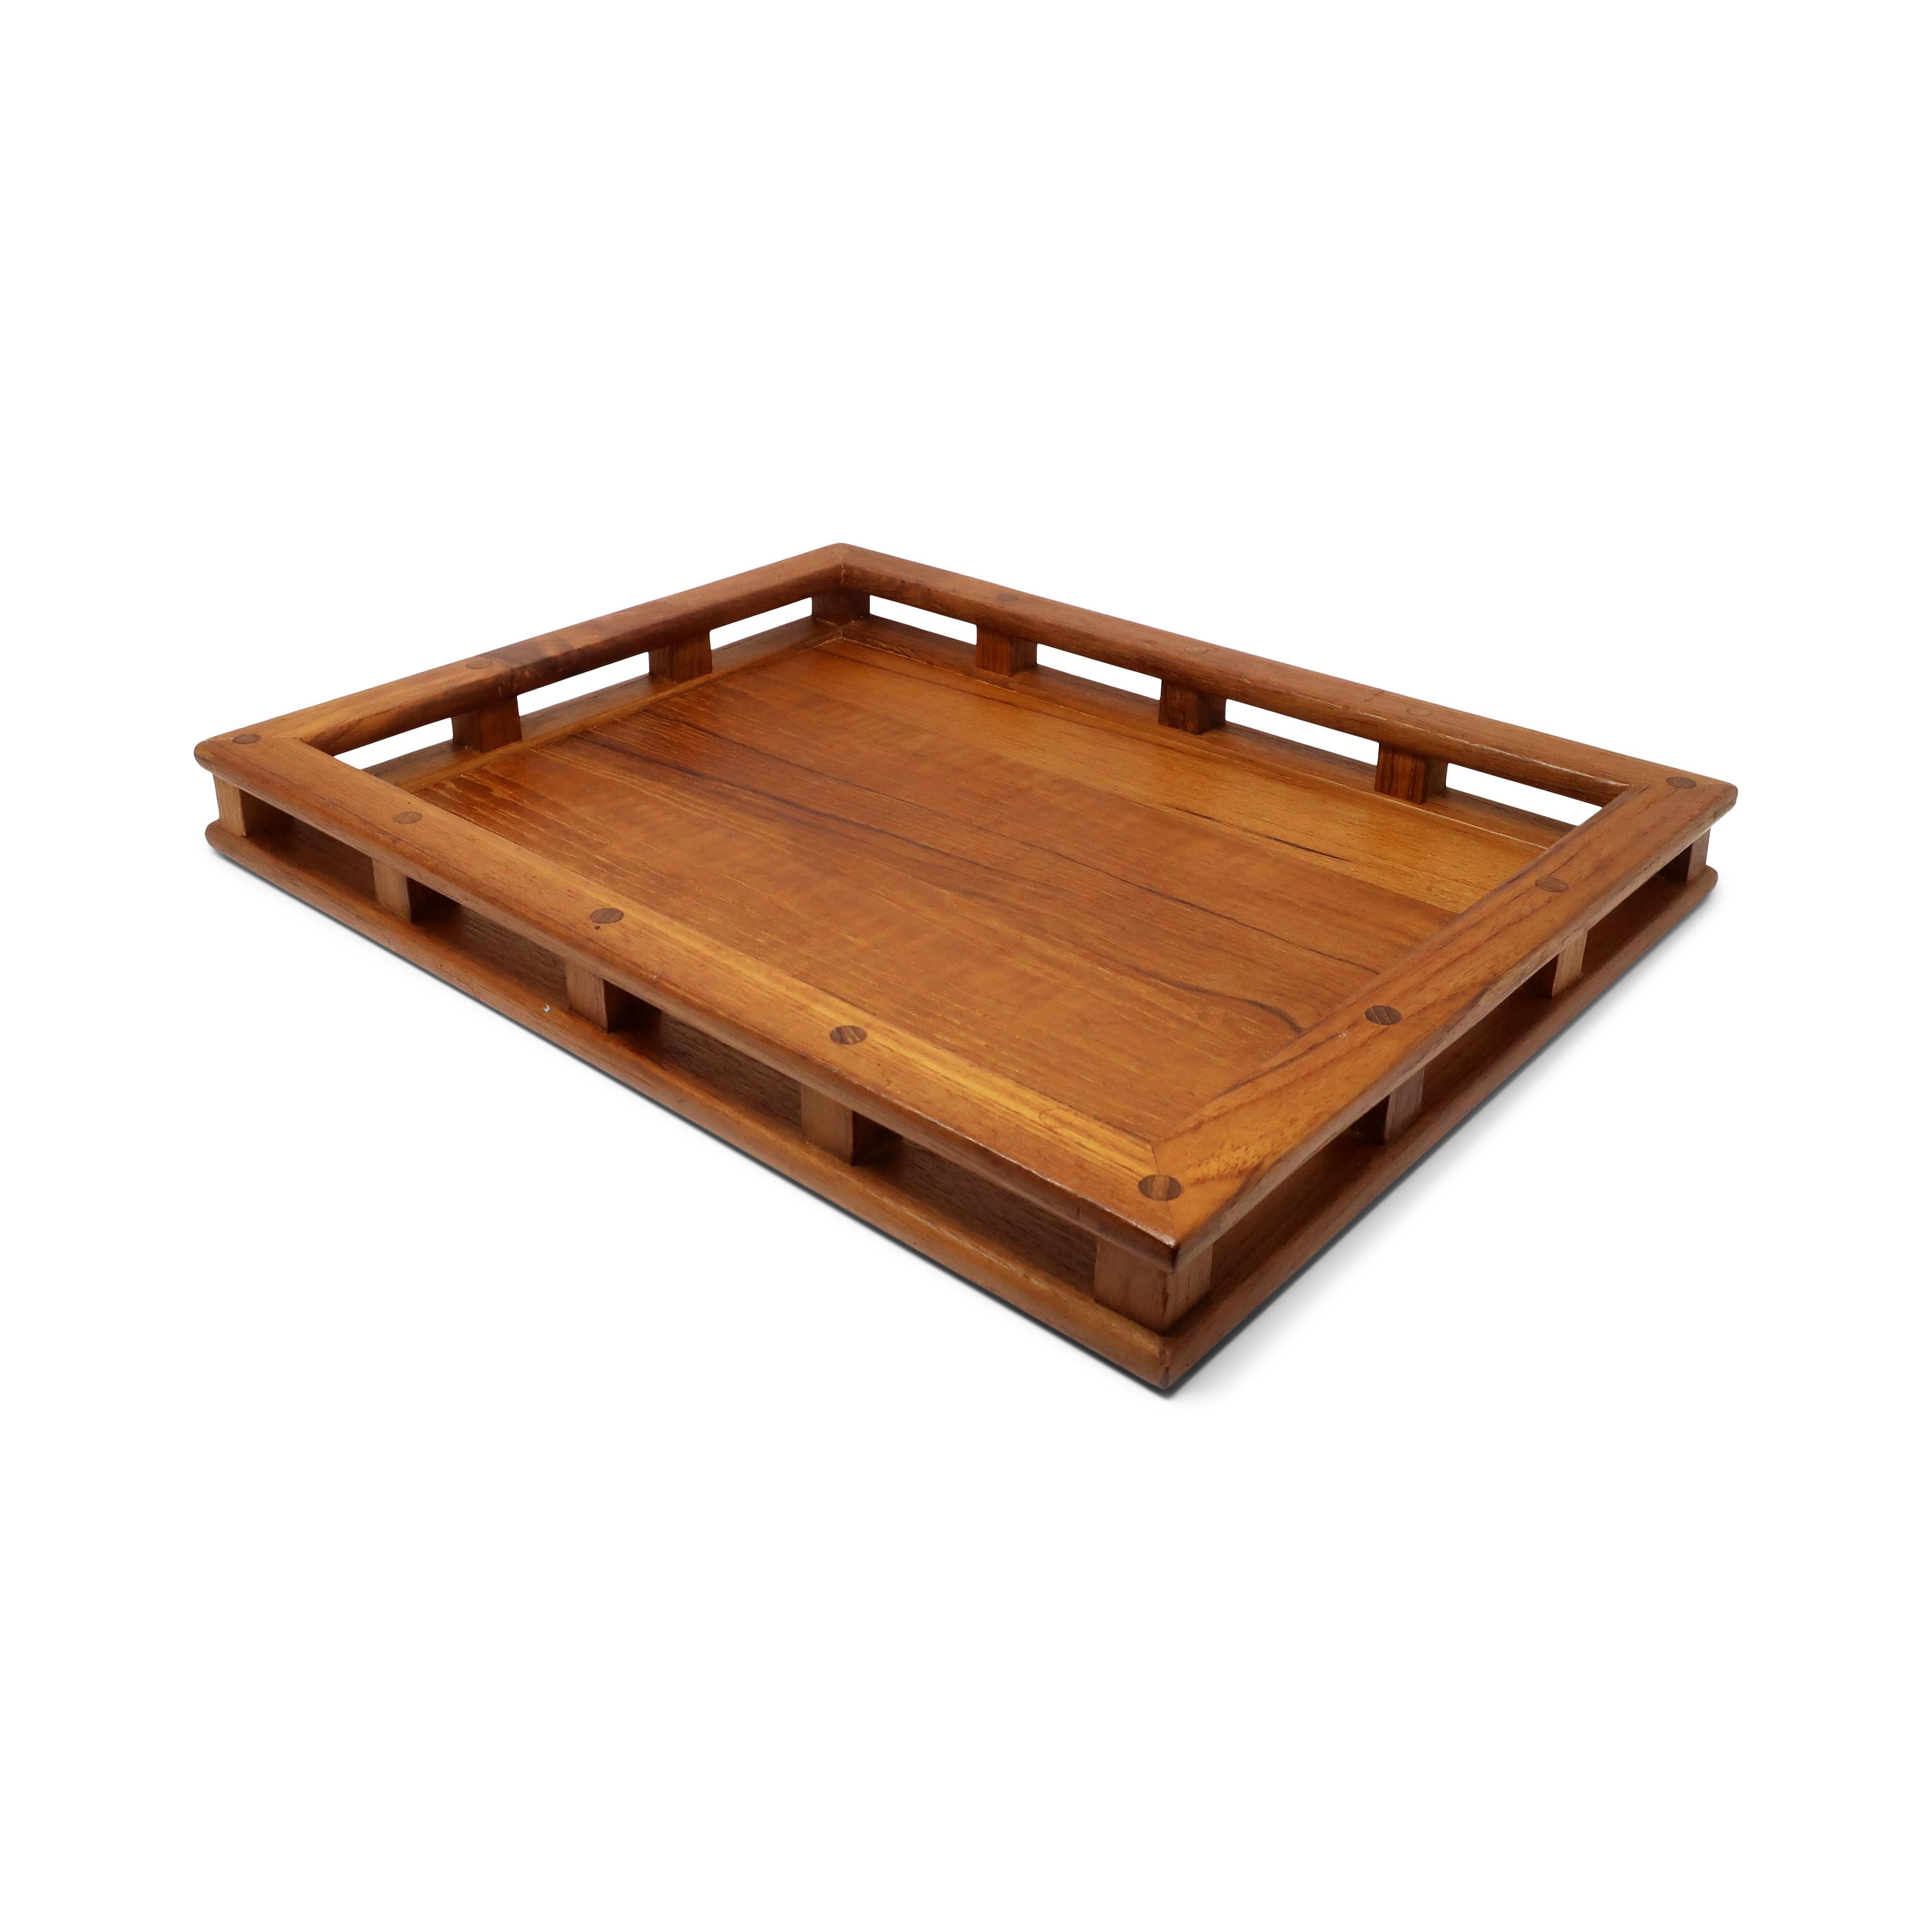 A Mid-Century Modern Dansk teak tray that is perfect for breakfast in bed, working on your laptop, dinner on the couch, or serving drinks to your favorite people. 

In good vintage condition with wear consistent with age and use. Marked on